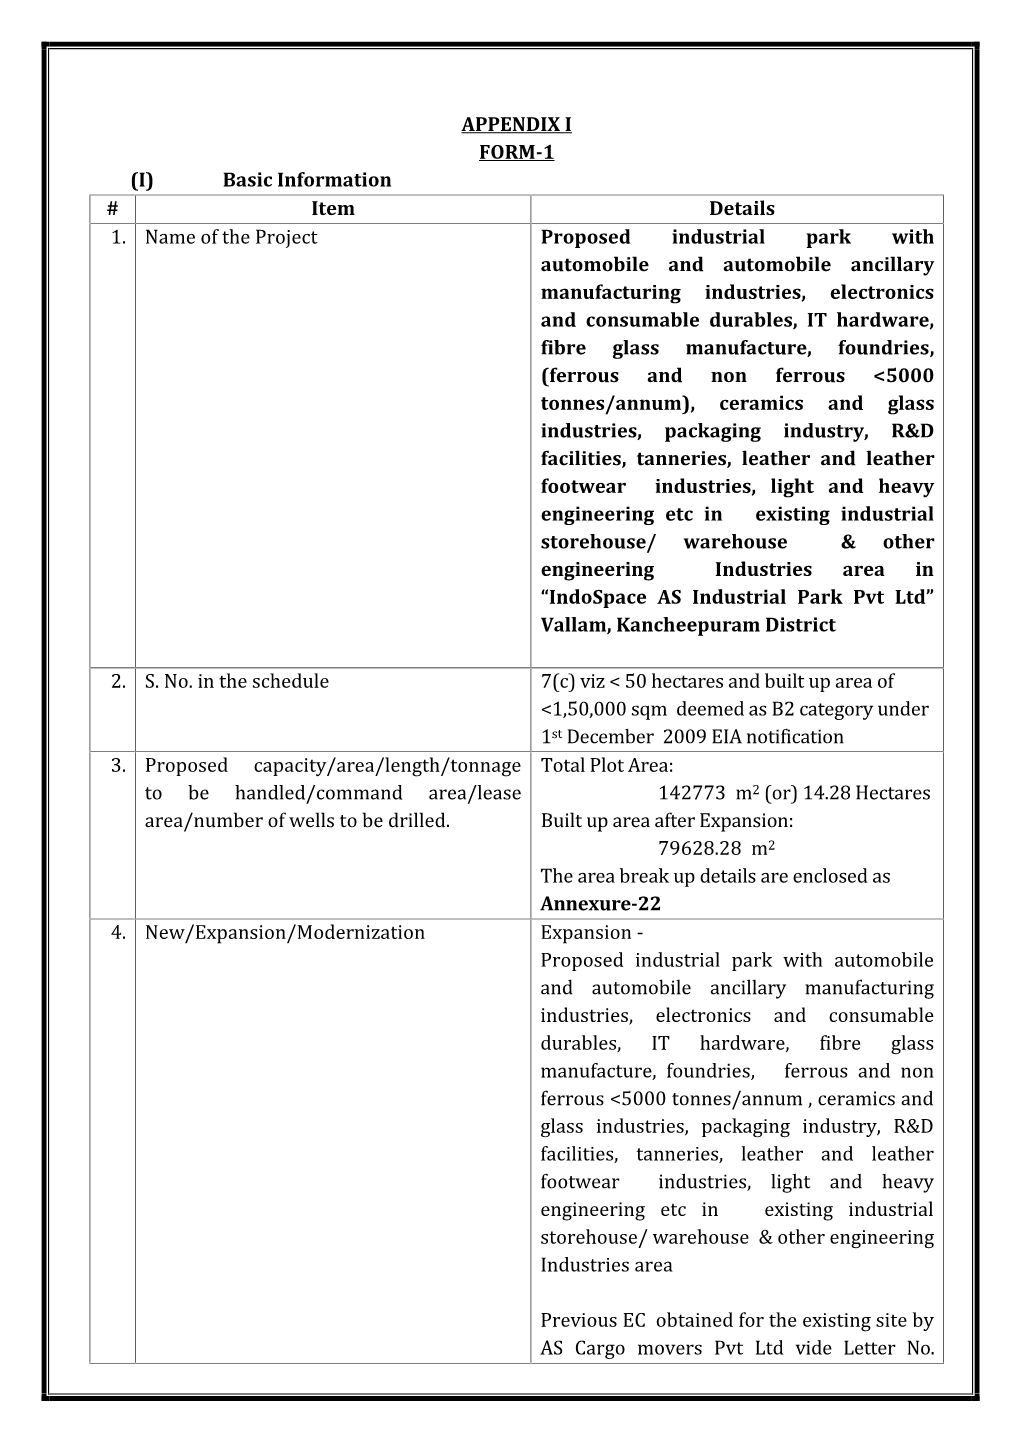 APPENDIX I FORM-1 (I) Basic Information # Item Details Proposed Industrial Park with Automobile and Automobile Ancillary 1